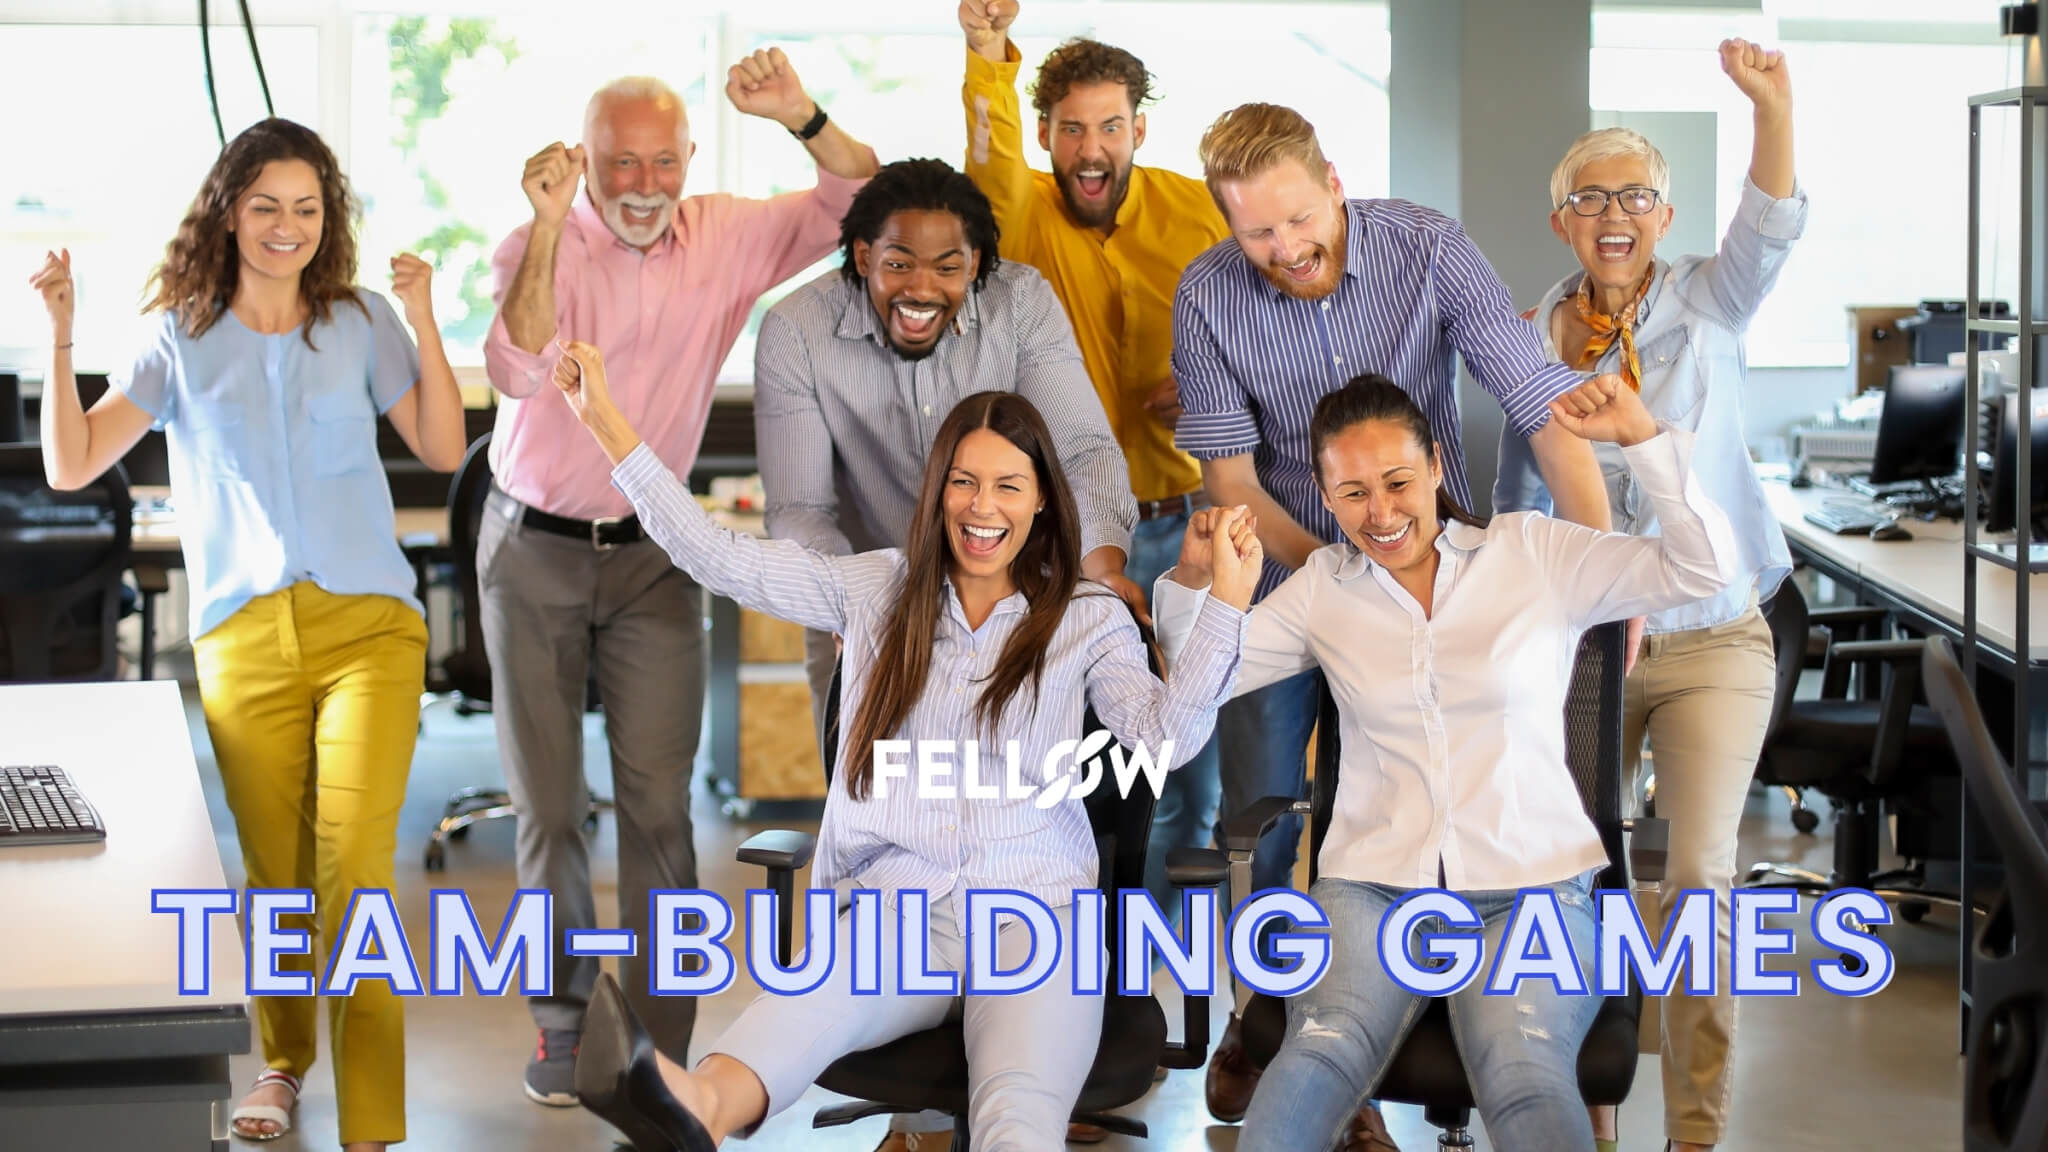 11 New Team Building Games in 2021